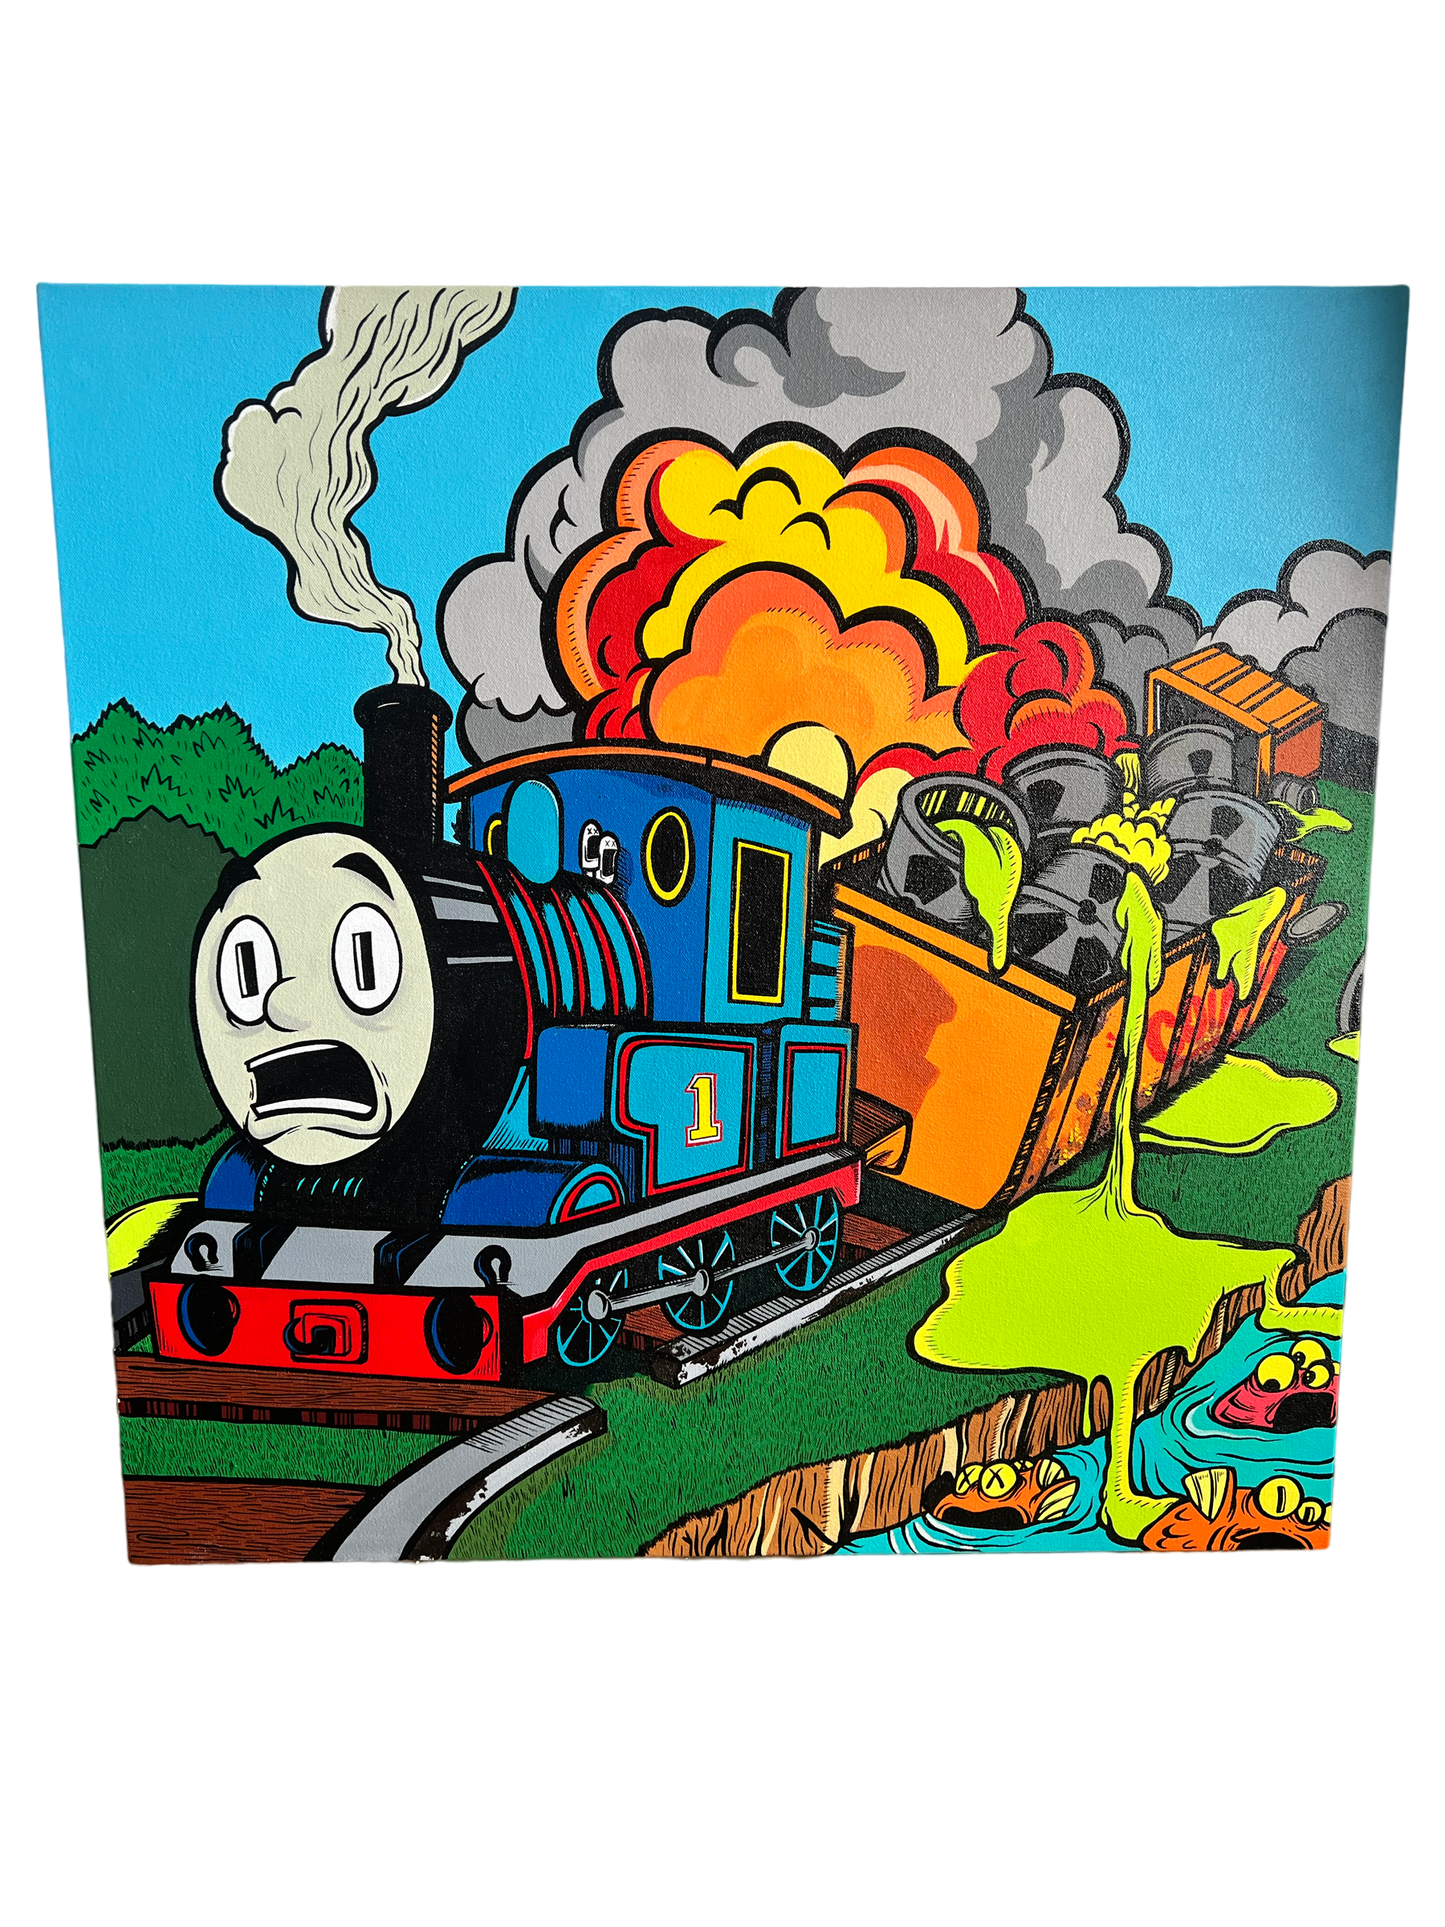 THOMAS THE WRECKED TRAIN PRINT BY COINSLOT